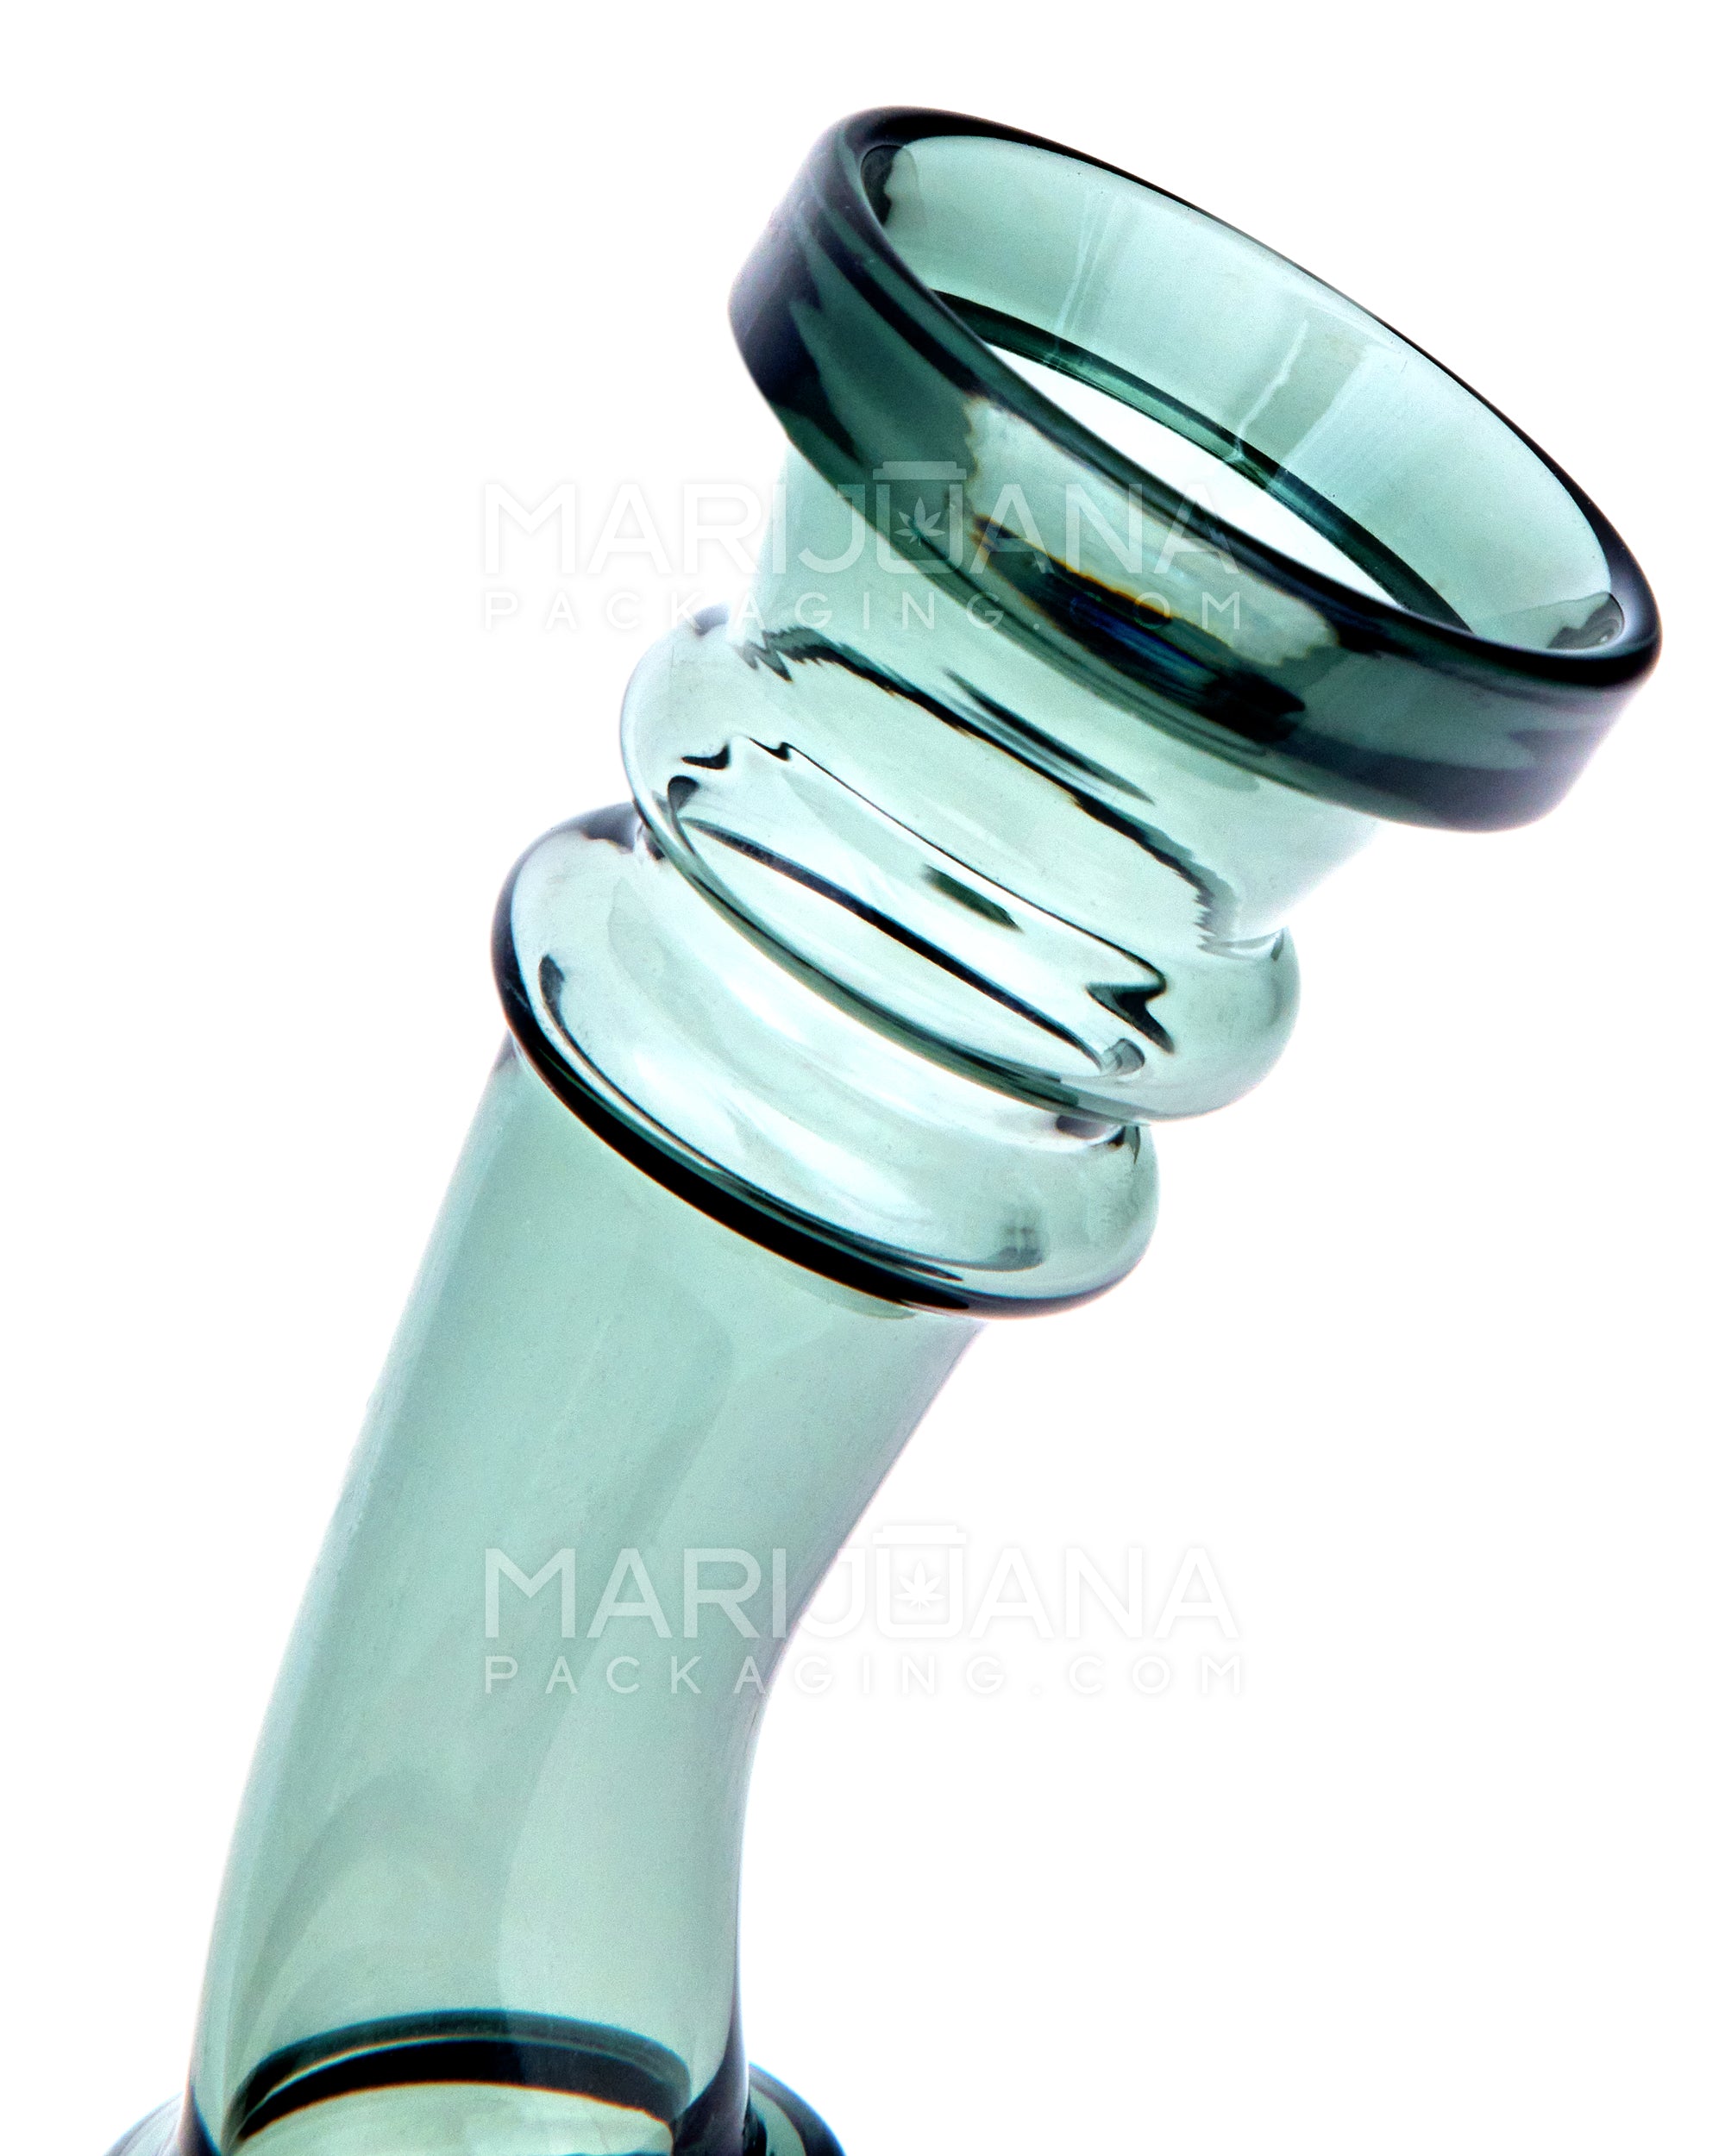 PIT BULL | Ringed Bent Neck Circ Perc Glass Water Pipe w/ Thick Base | 6.5in Tall - 14mm Bowl - Smoked Teal - 4